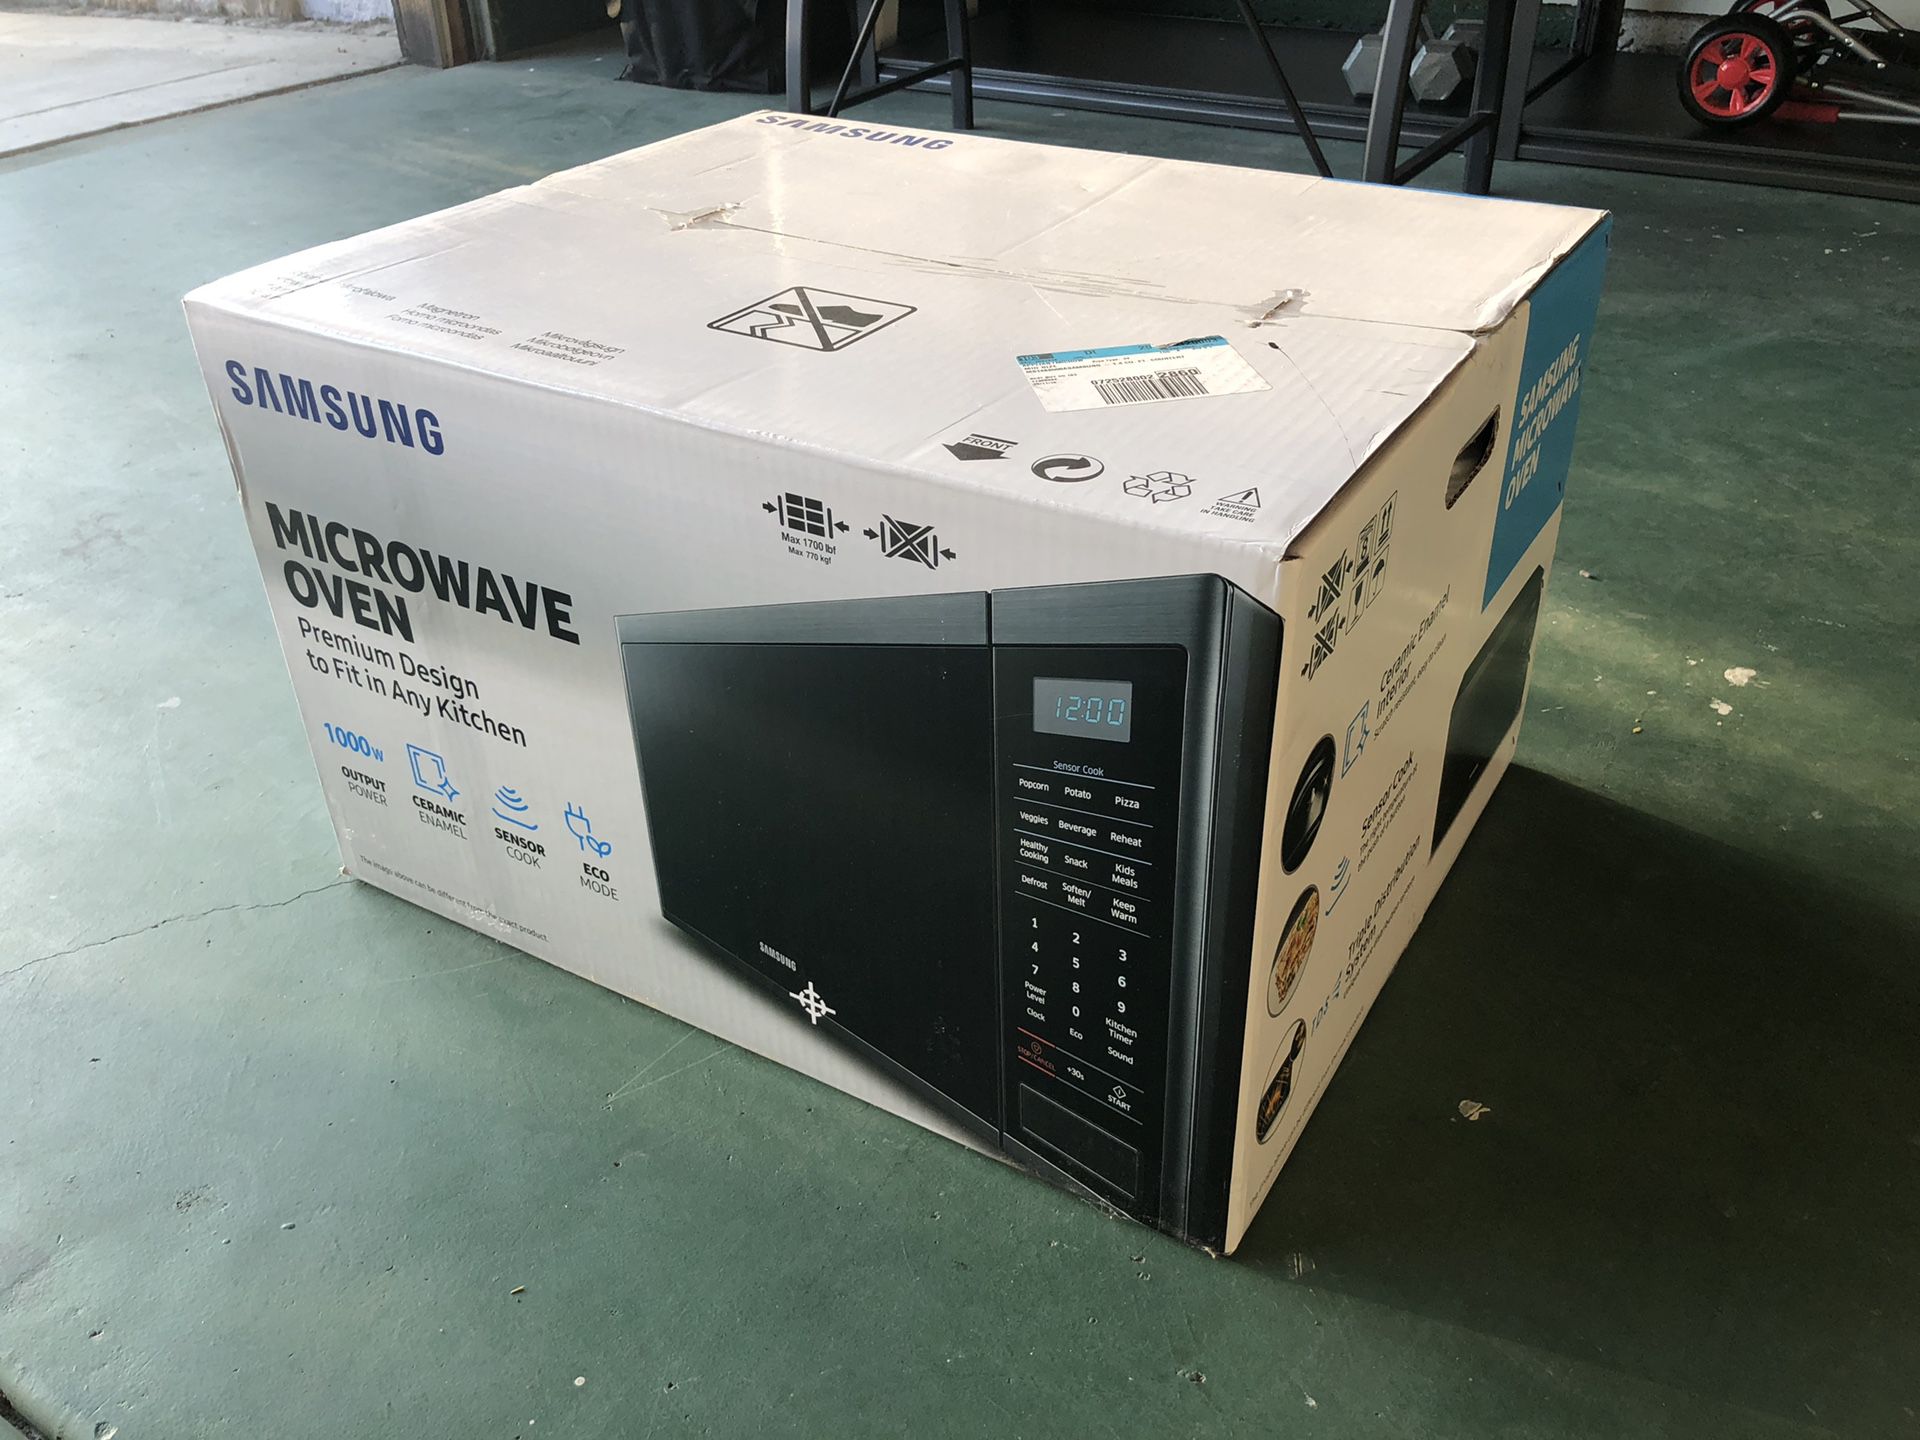 Samsung Microwave Brand New in box never opened